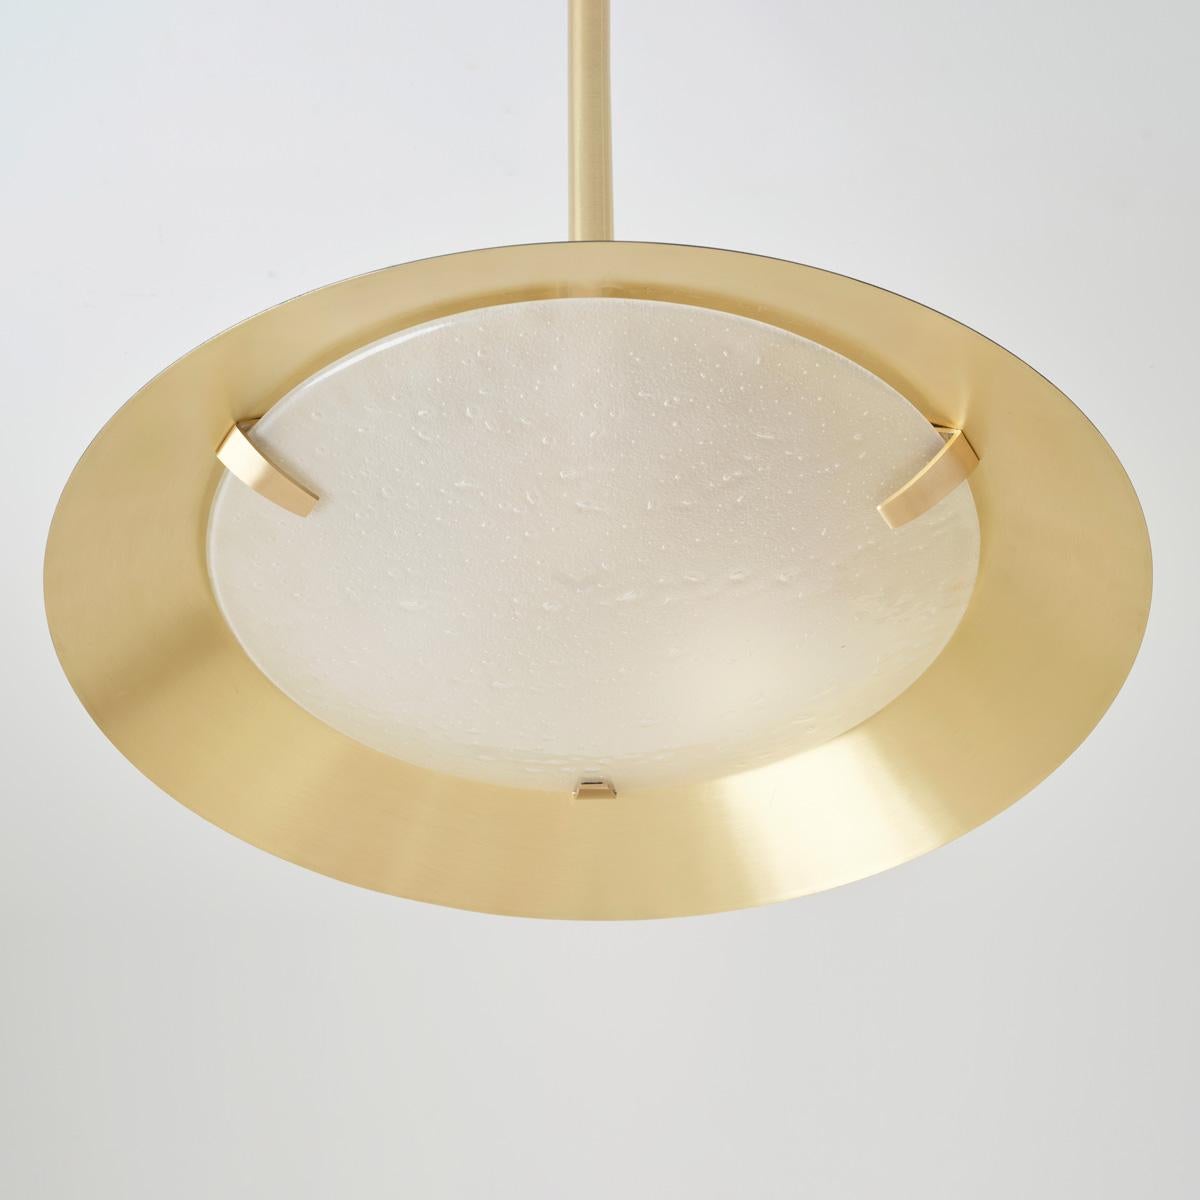 Kono Pendant by Gaspare Asaro. Satin Brass and Sand White For Sale 5